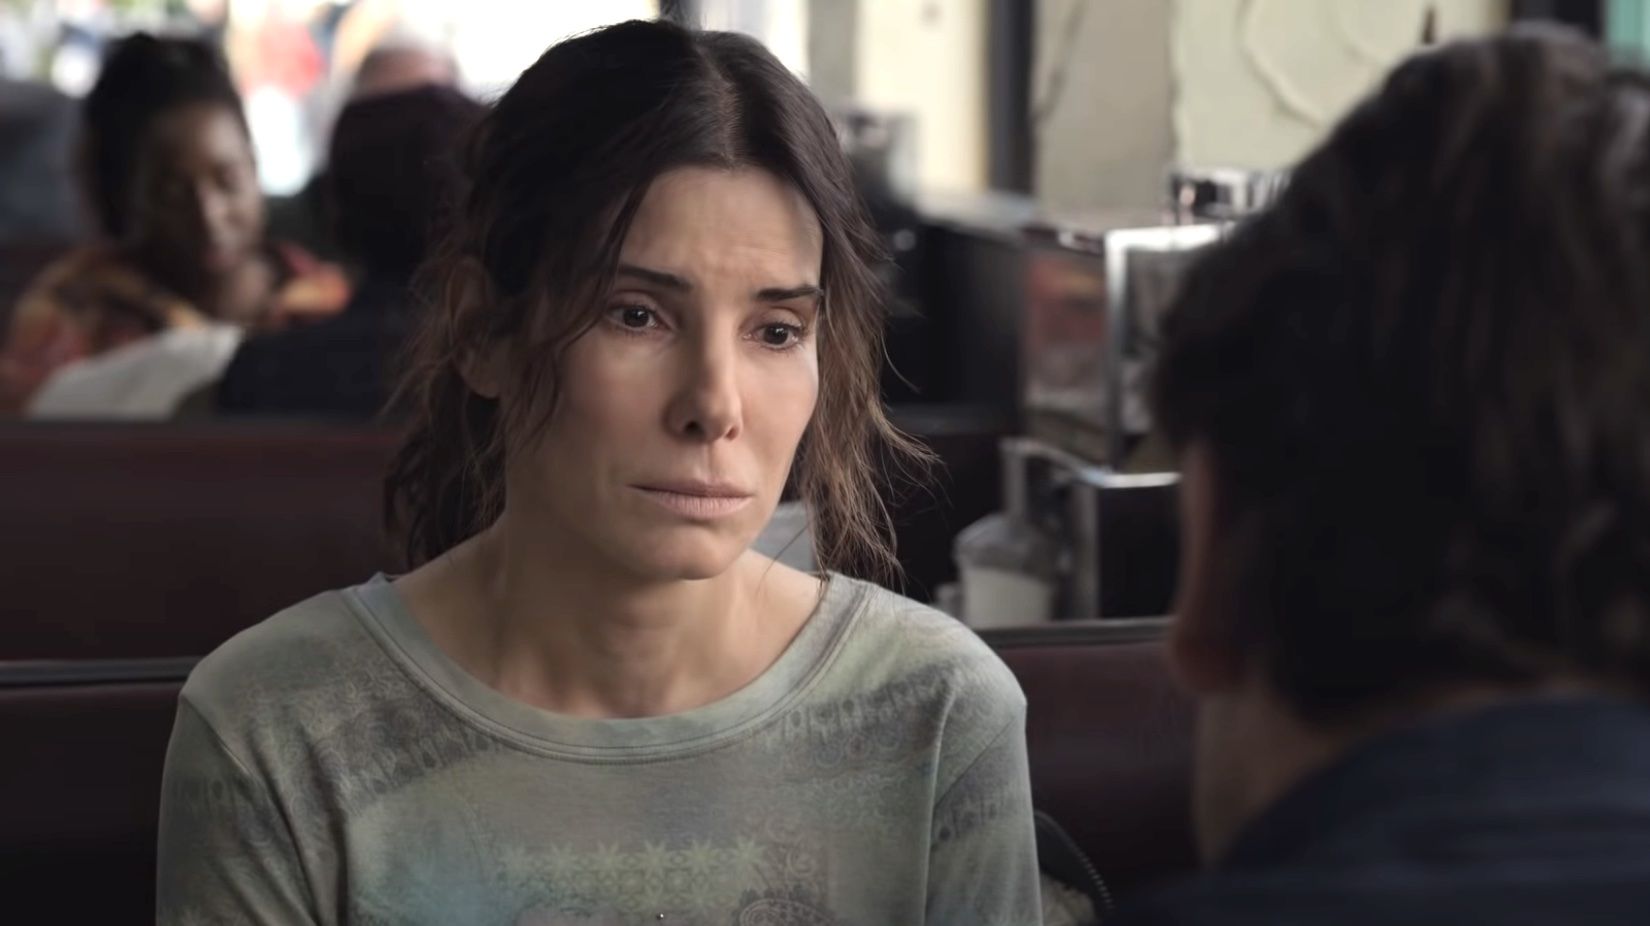 Sandra Bullock's The Unforgivable gets mediocre first reviews